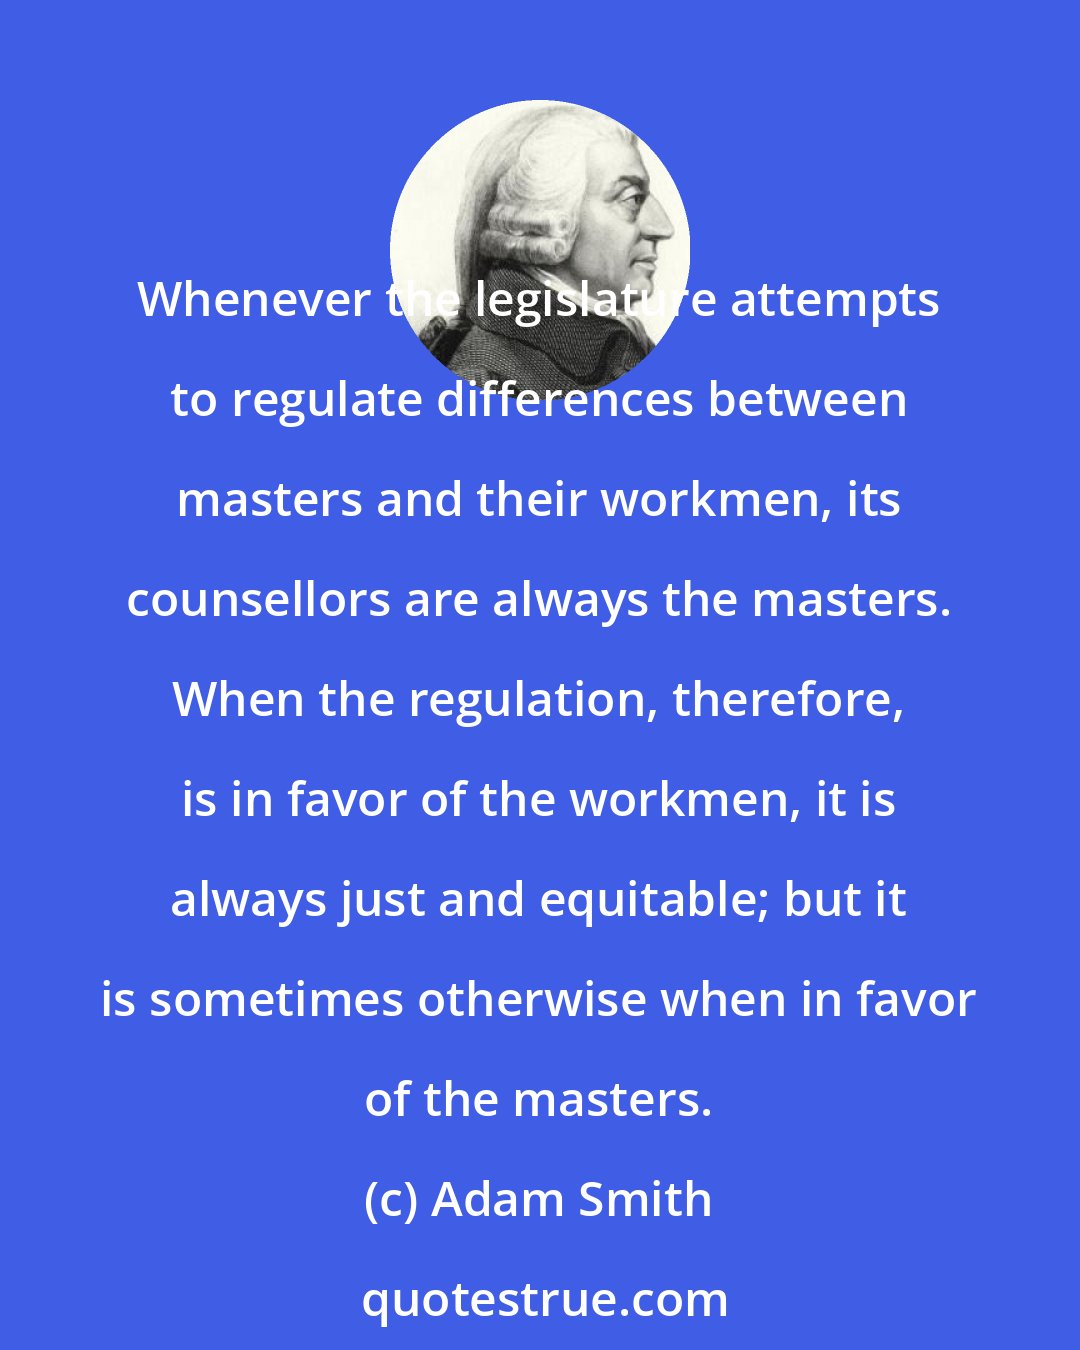 Adam Smith: Whenever the legislature attempts to regulate differences between masters and their workmen, its counsellors are always the masters. When the regulation, therefore, is in favor of the workmen, it is always just and equitable; but it is sometimes otherwise when in favor of the masters.